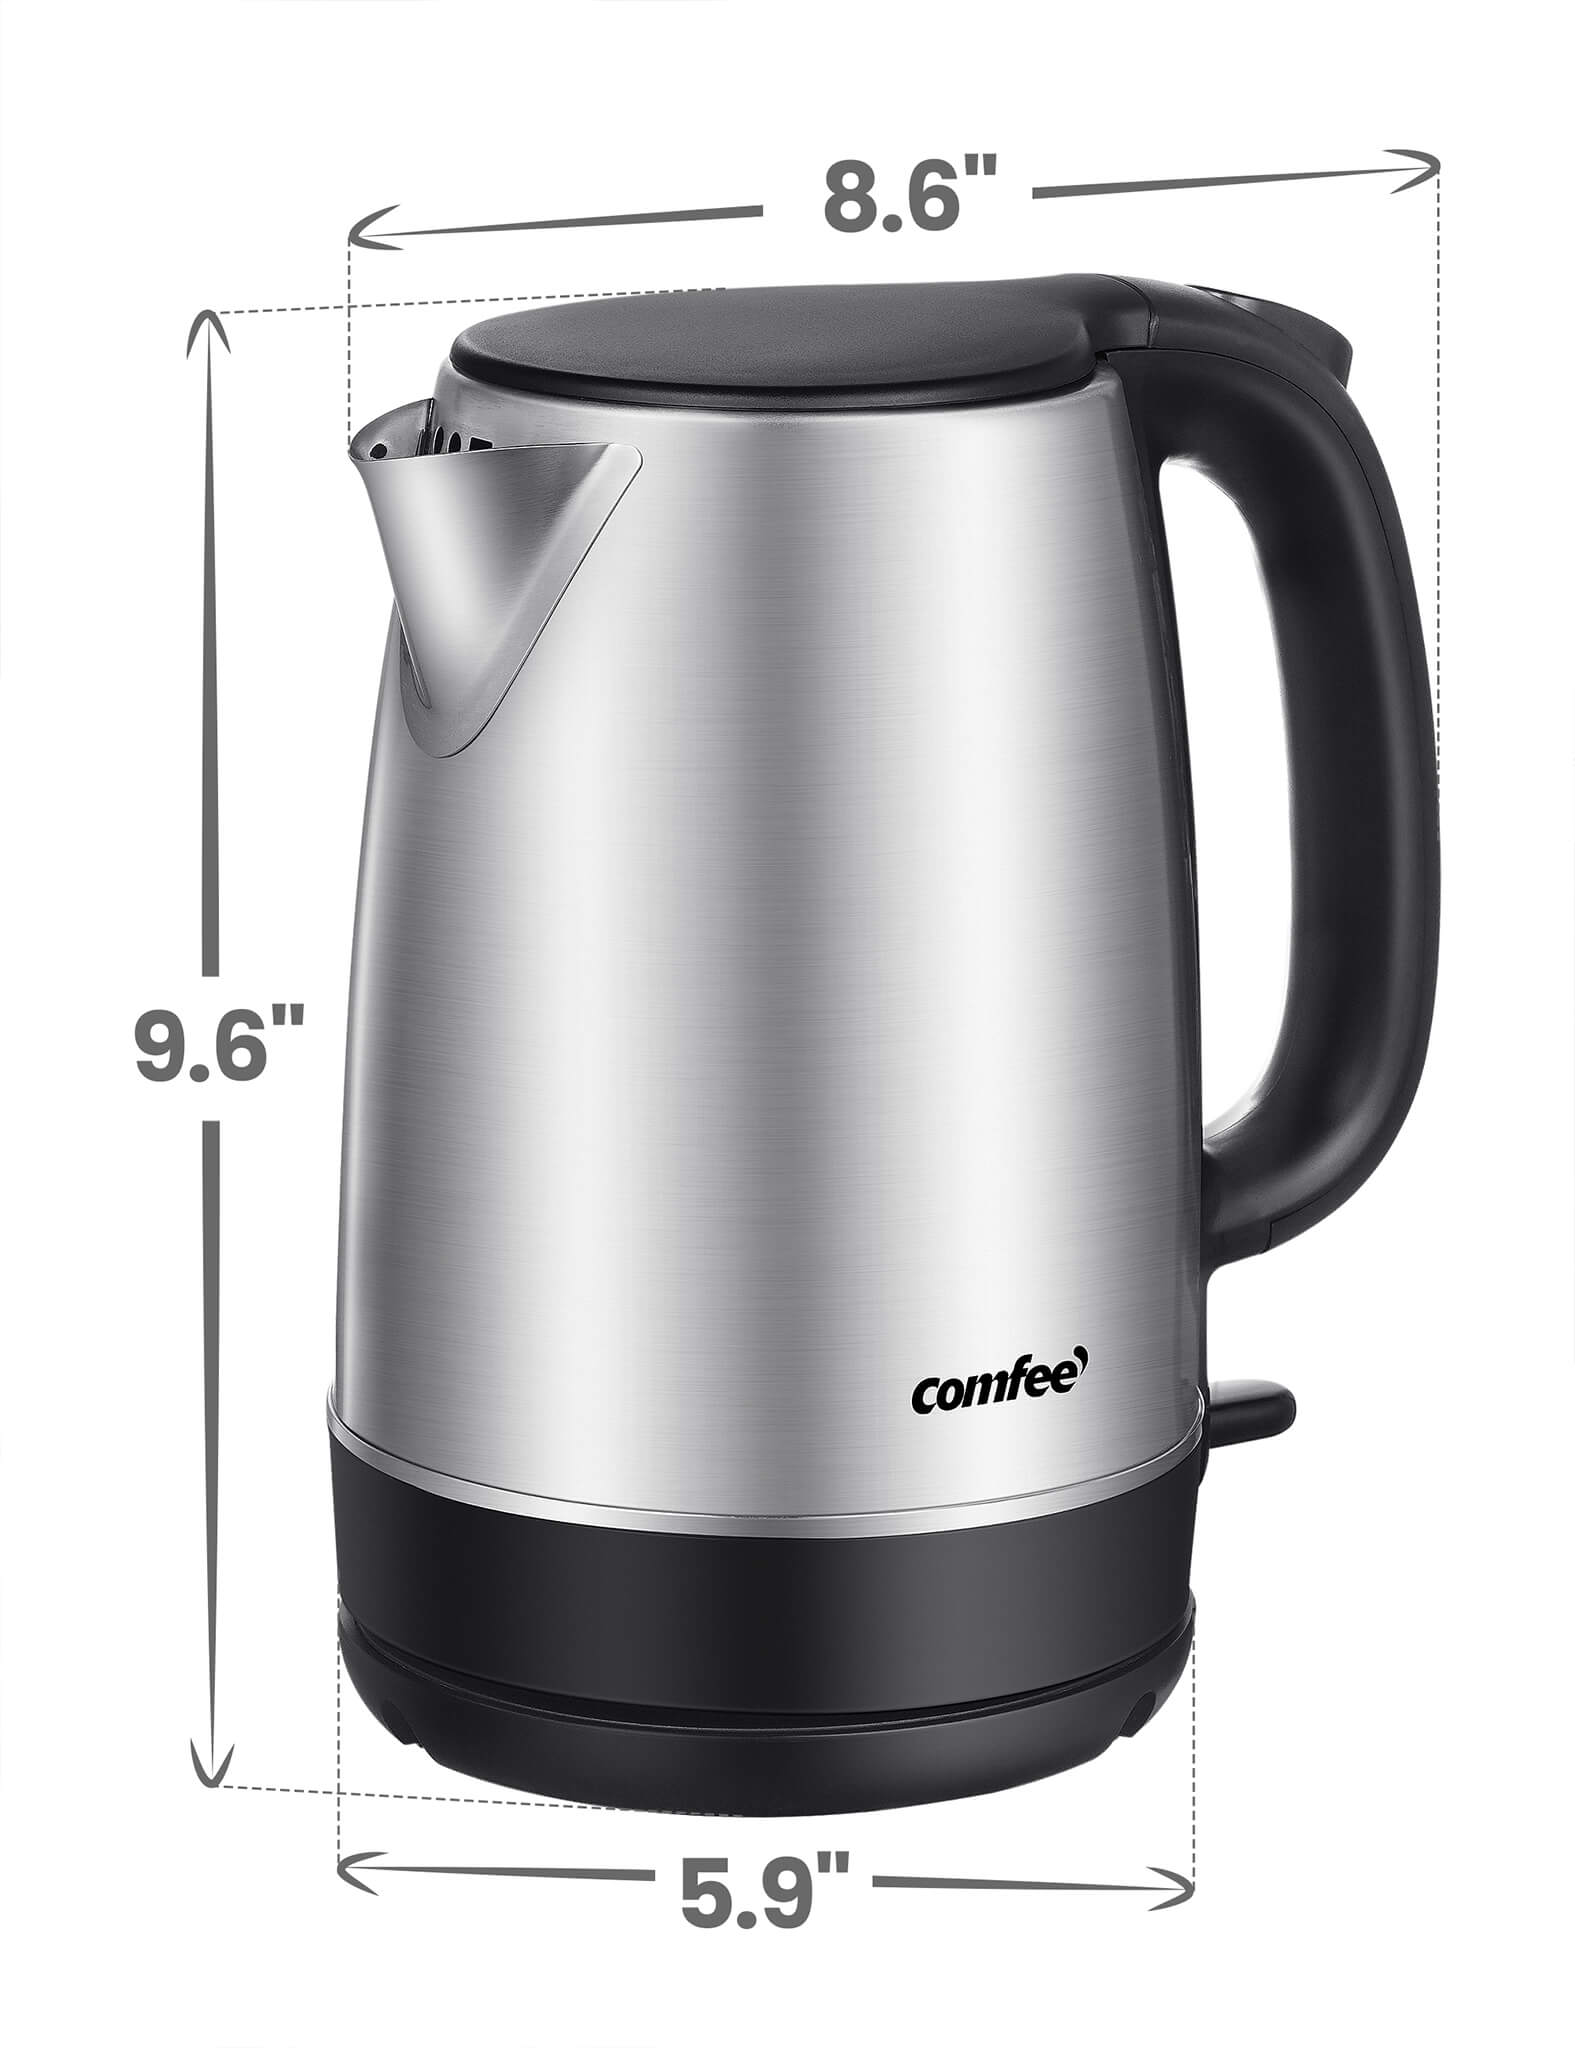 size dimensions of comfee stainless steel electric tea kettle